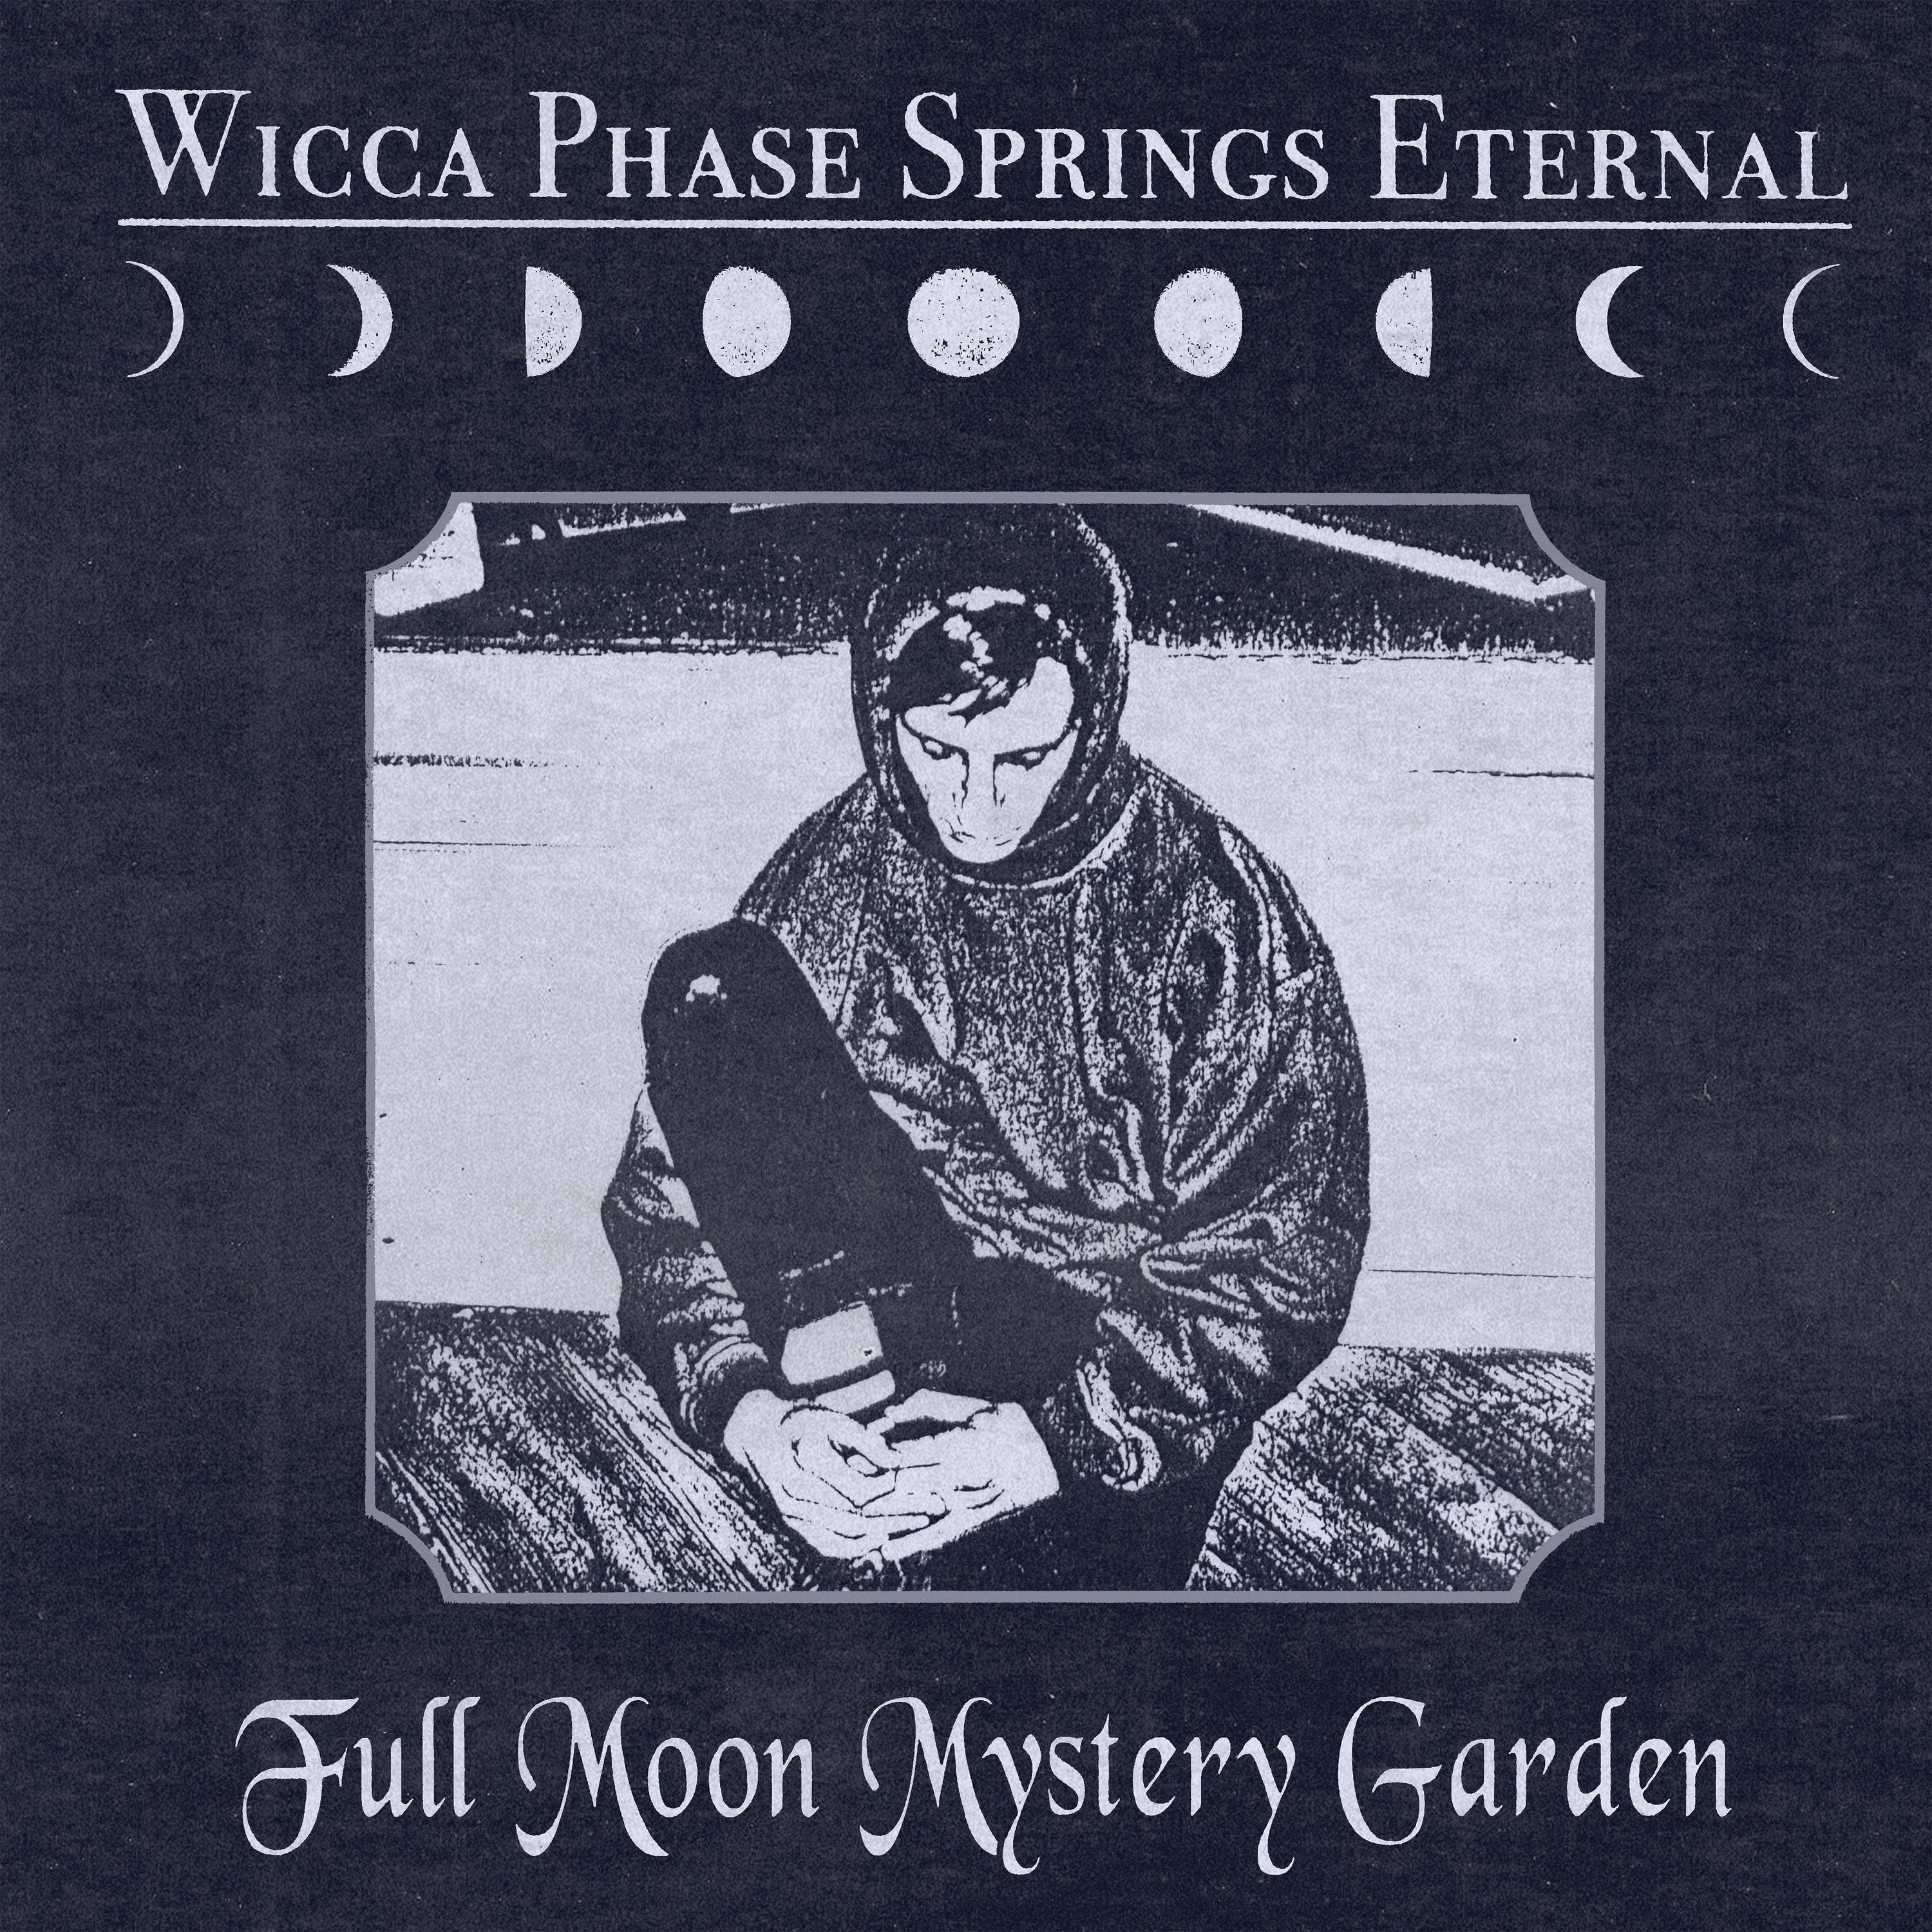 WICCA PHASE SPRINGS ETERNAL - It's the Chaos from a Hard Time